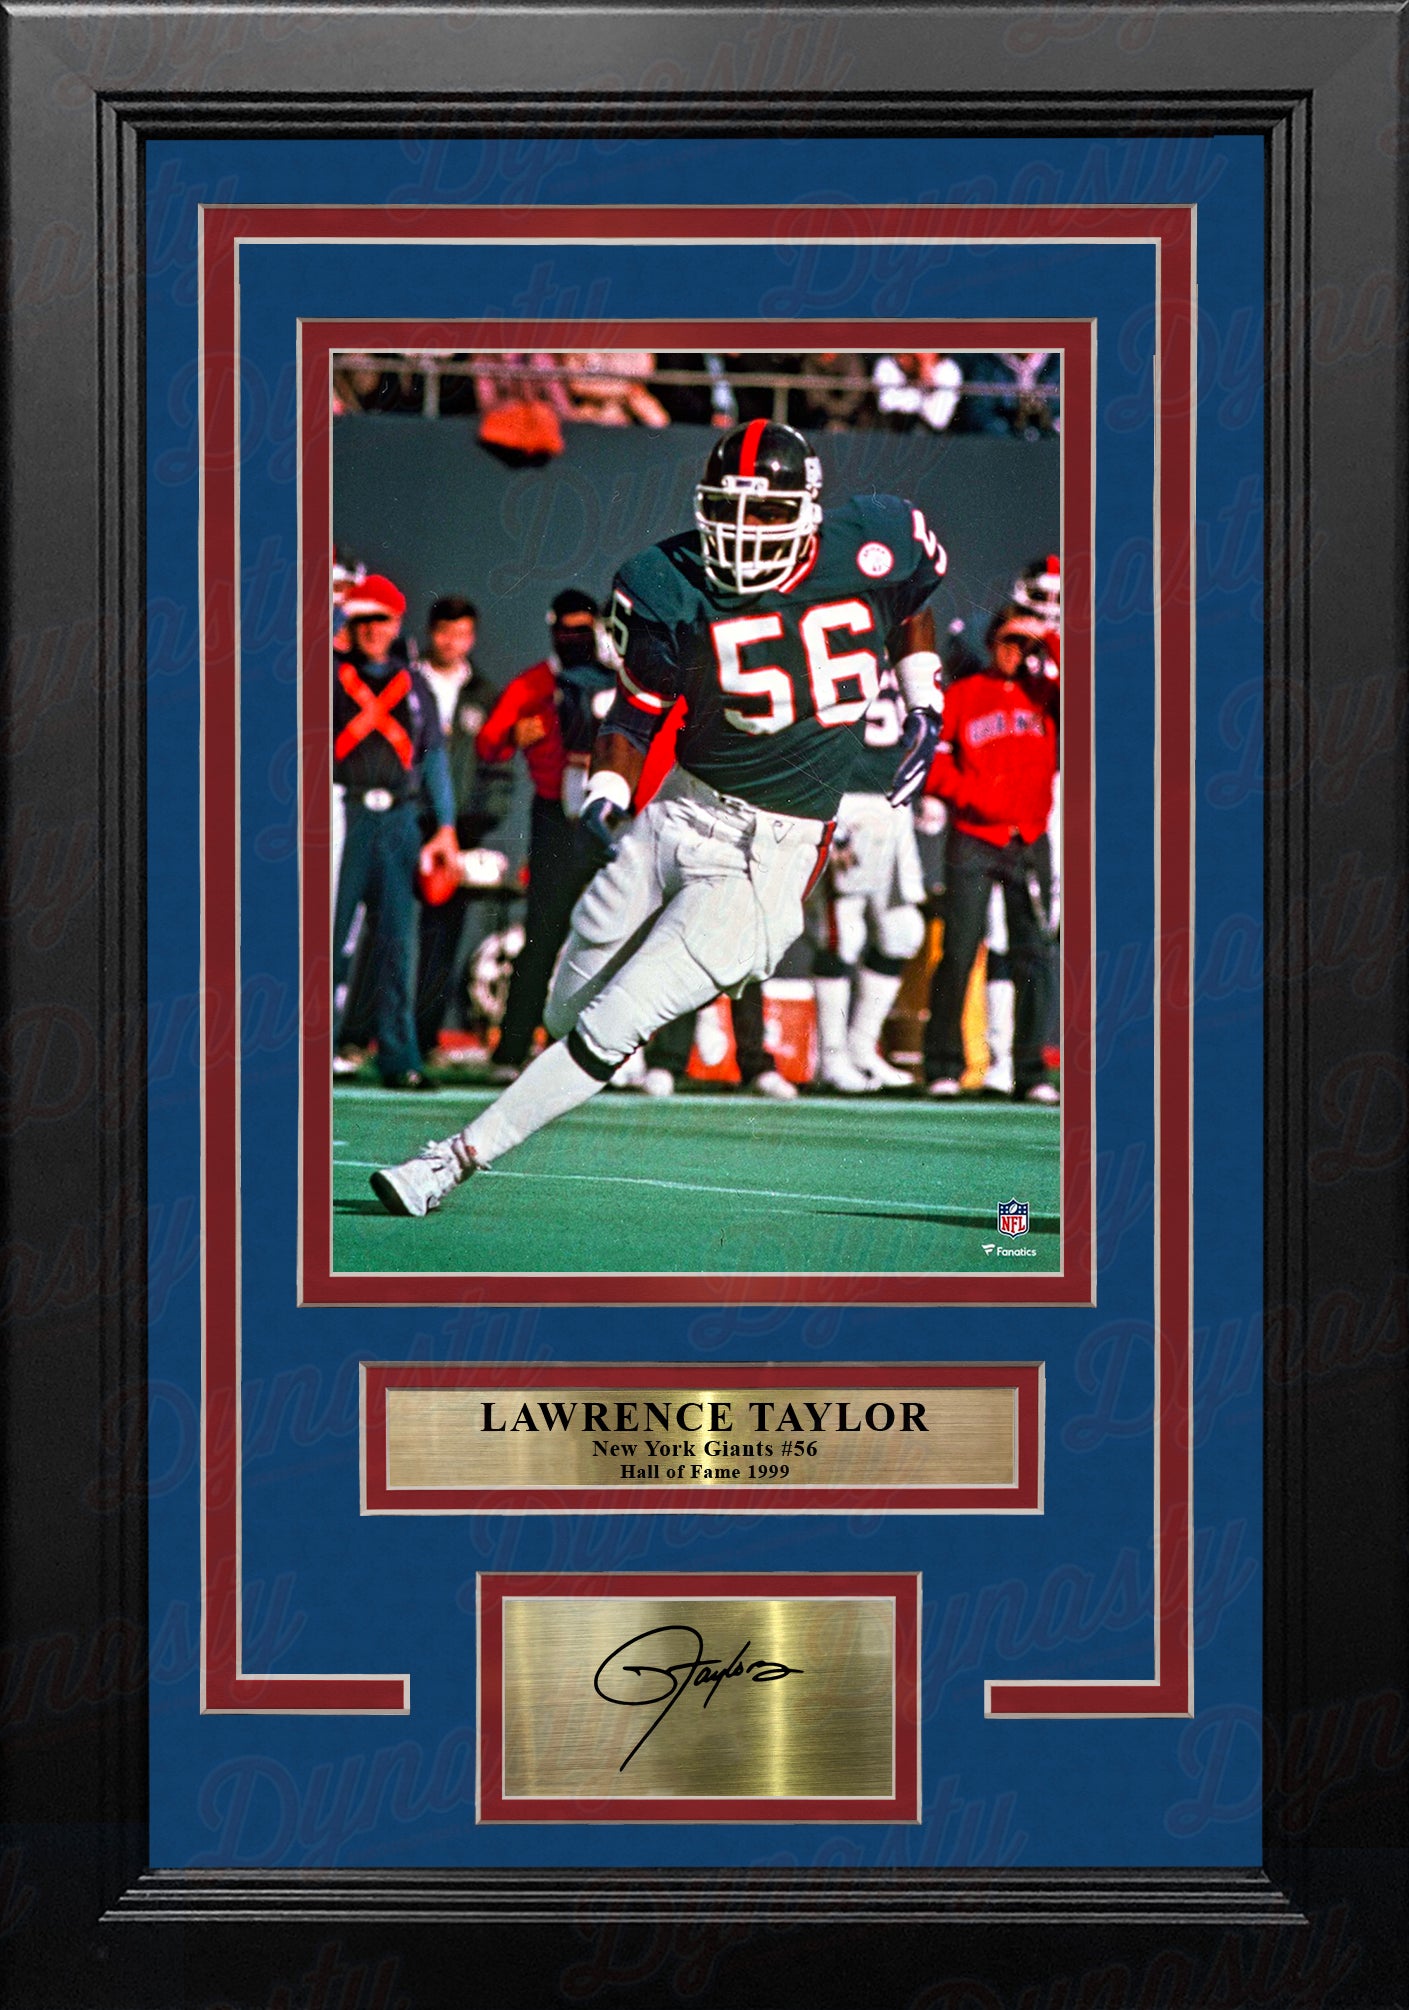 Lawrence Taylor in Action New York Giants 8x10 Framed Football Photo with Engraved Autograph - Dynasty Sports & Framing 